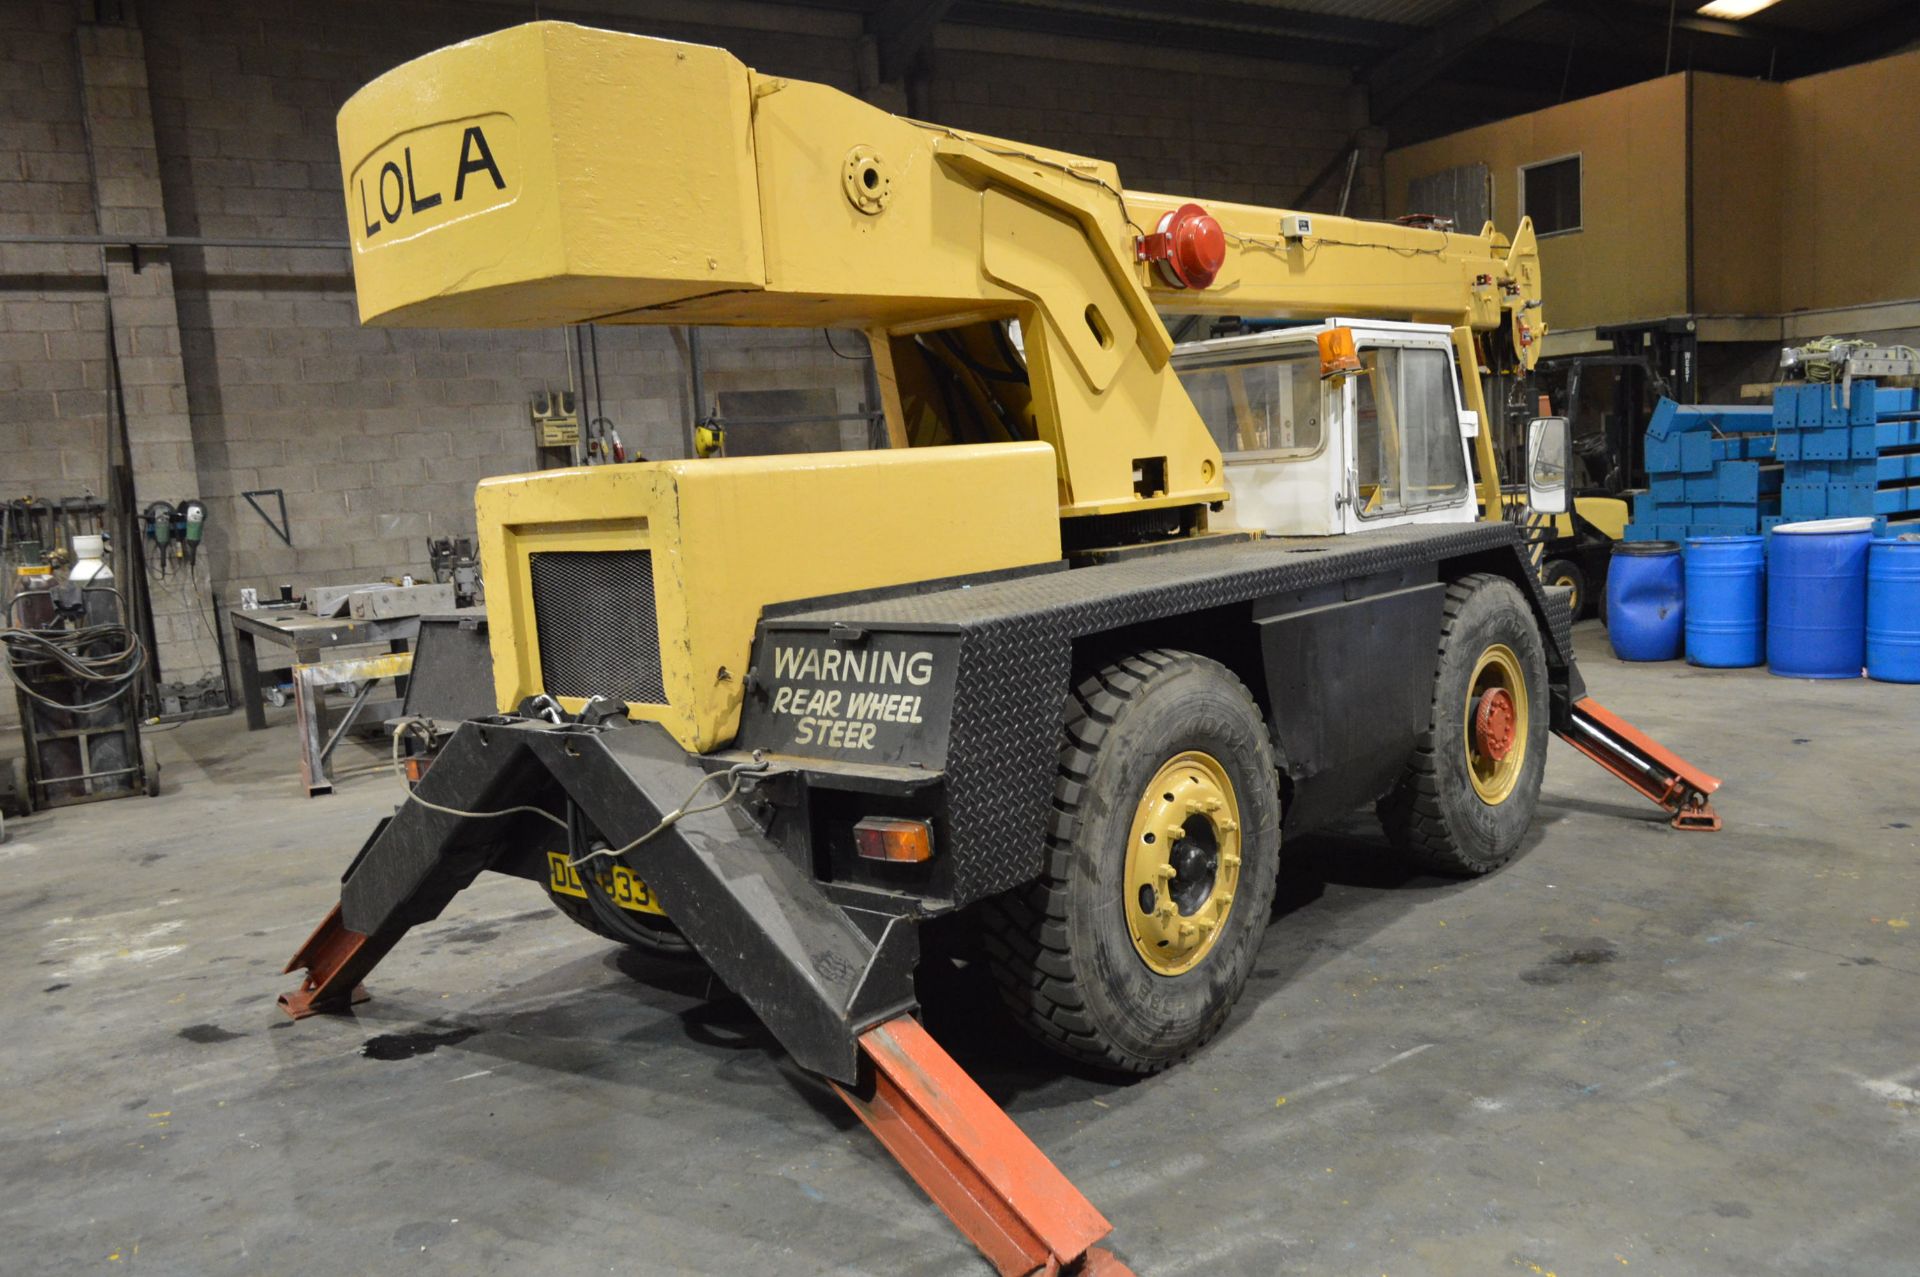 Coles IRON FAIRY JIF10 MOBILE CRANE, serial no. 9163, year of manufacture 1977, Loler certified, - Image 3 of 16